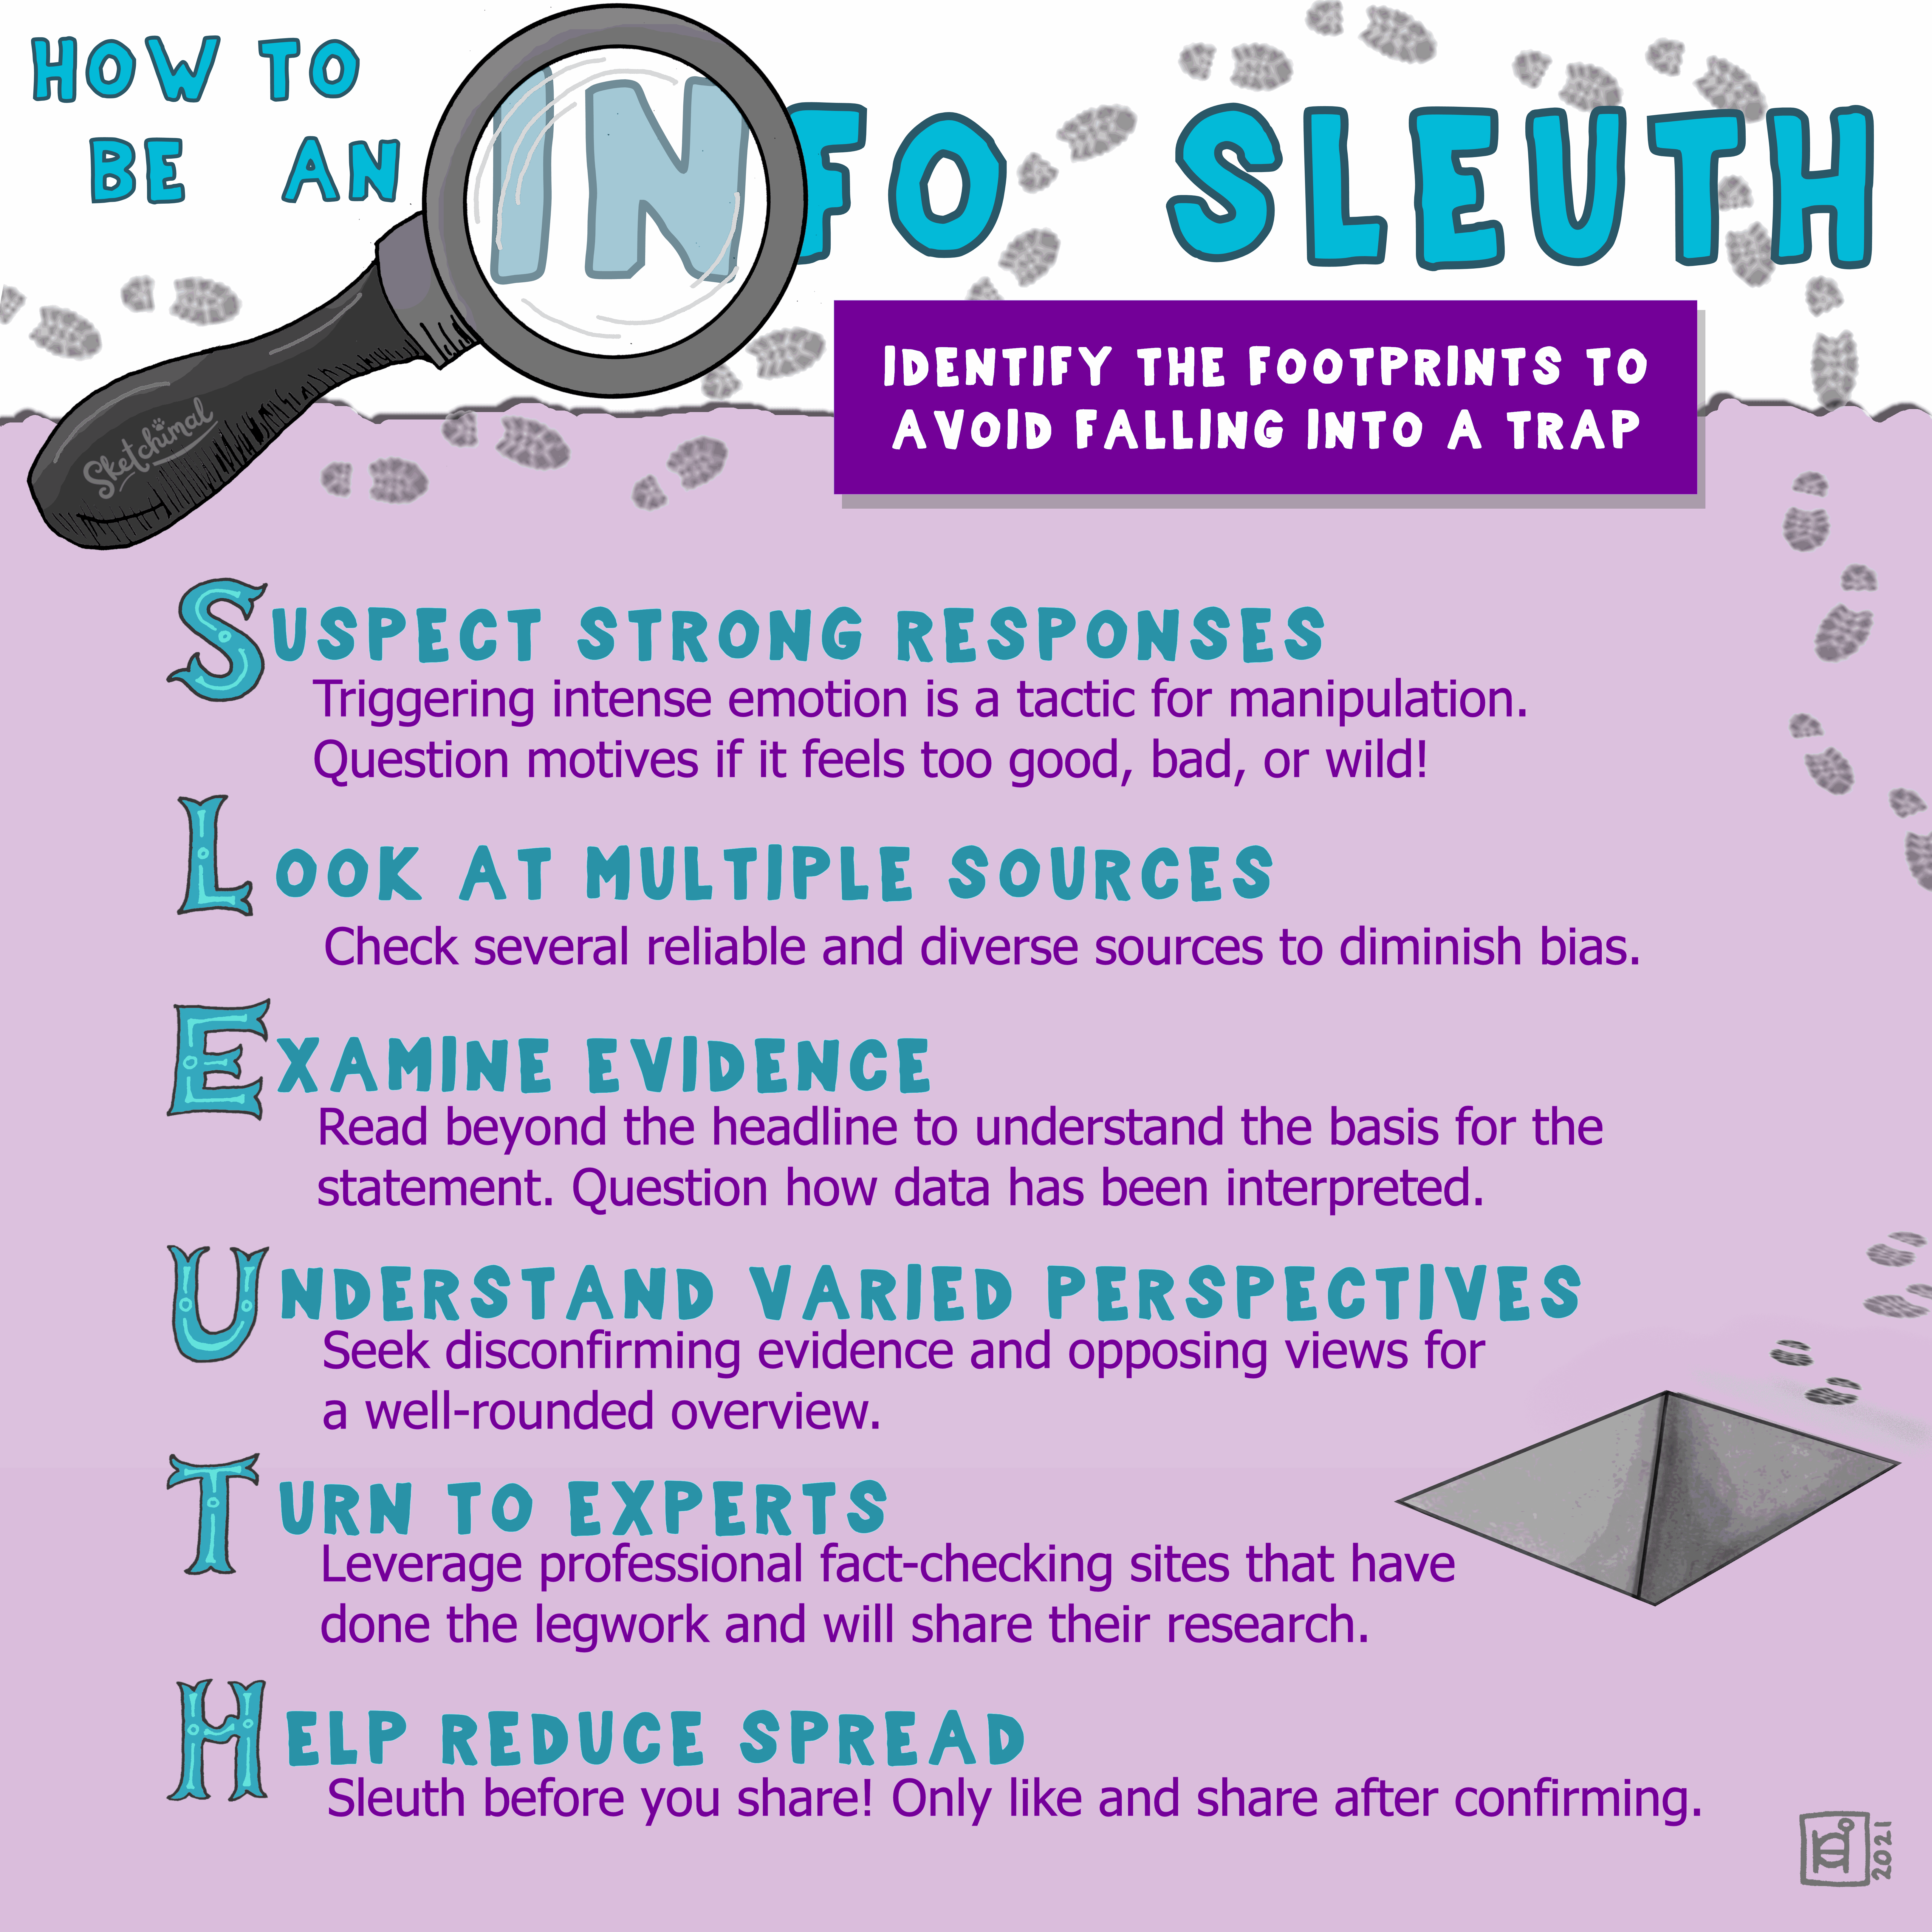 Sleuth before you share! Only like or forward information after you've completed your investigation.